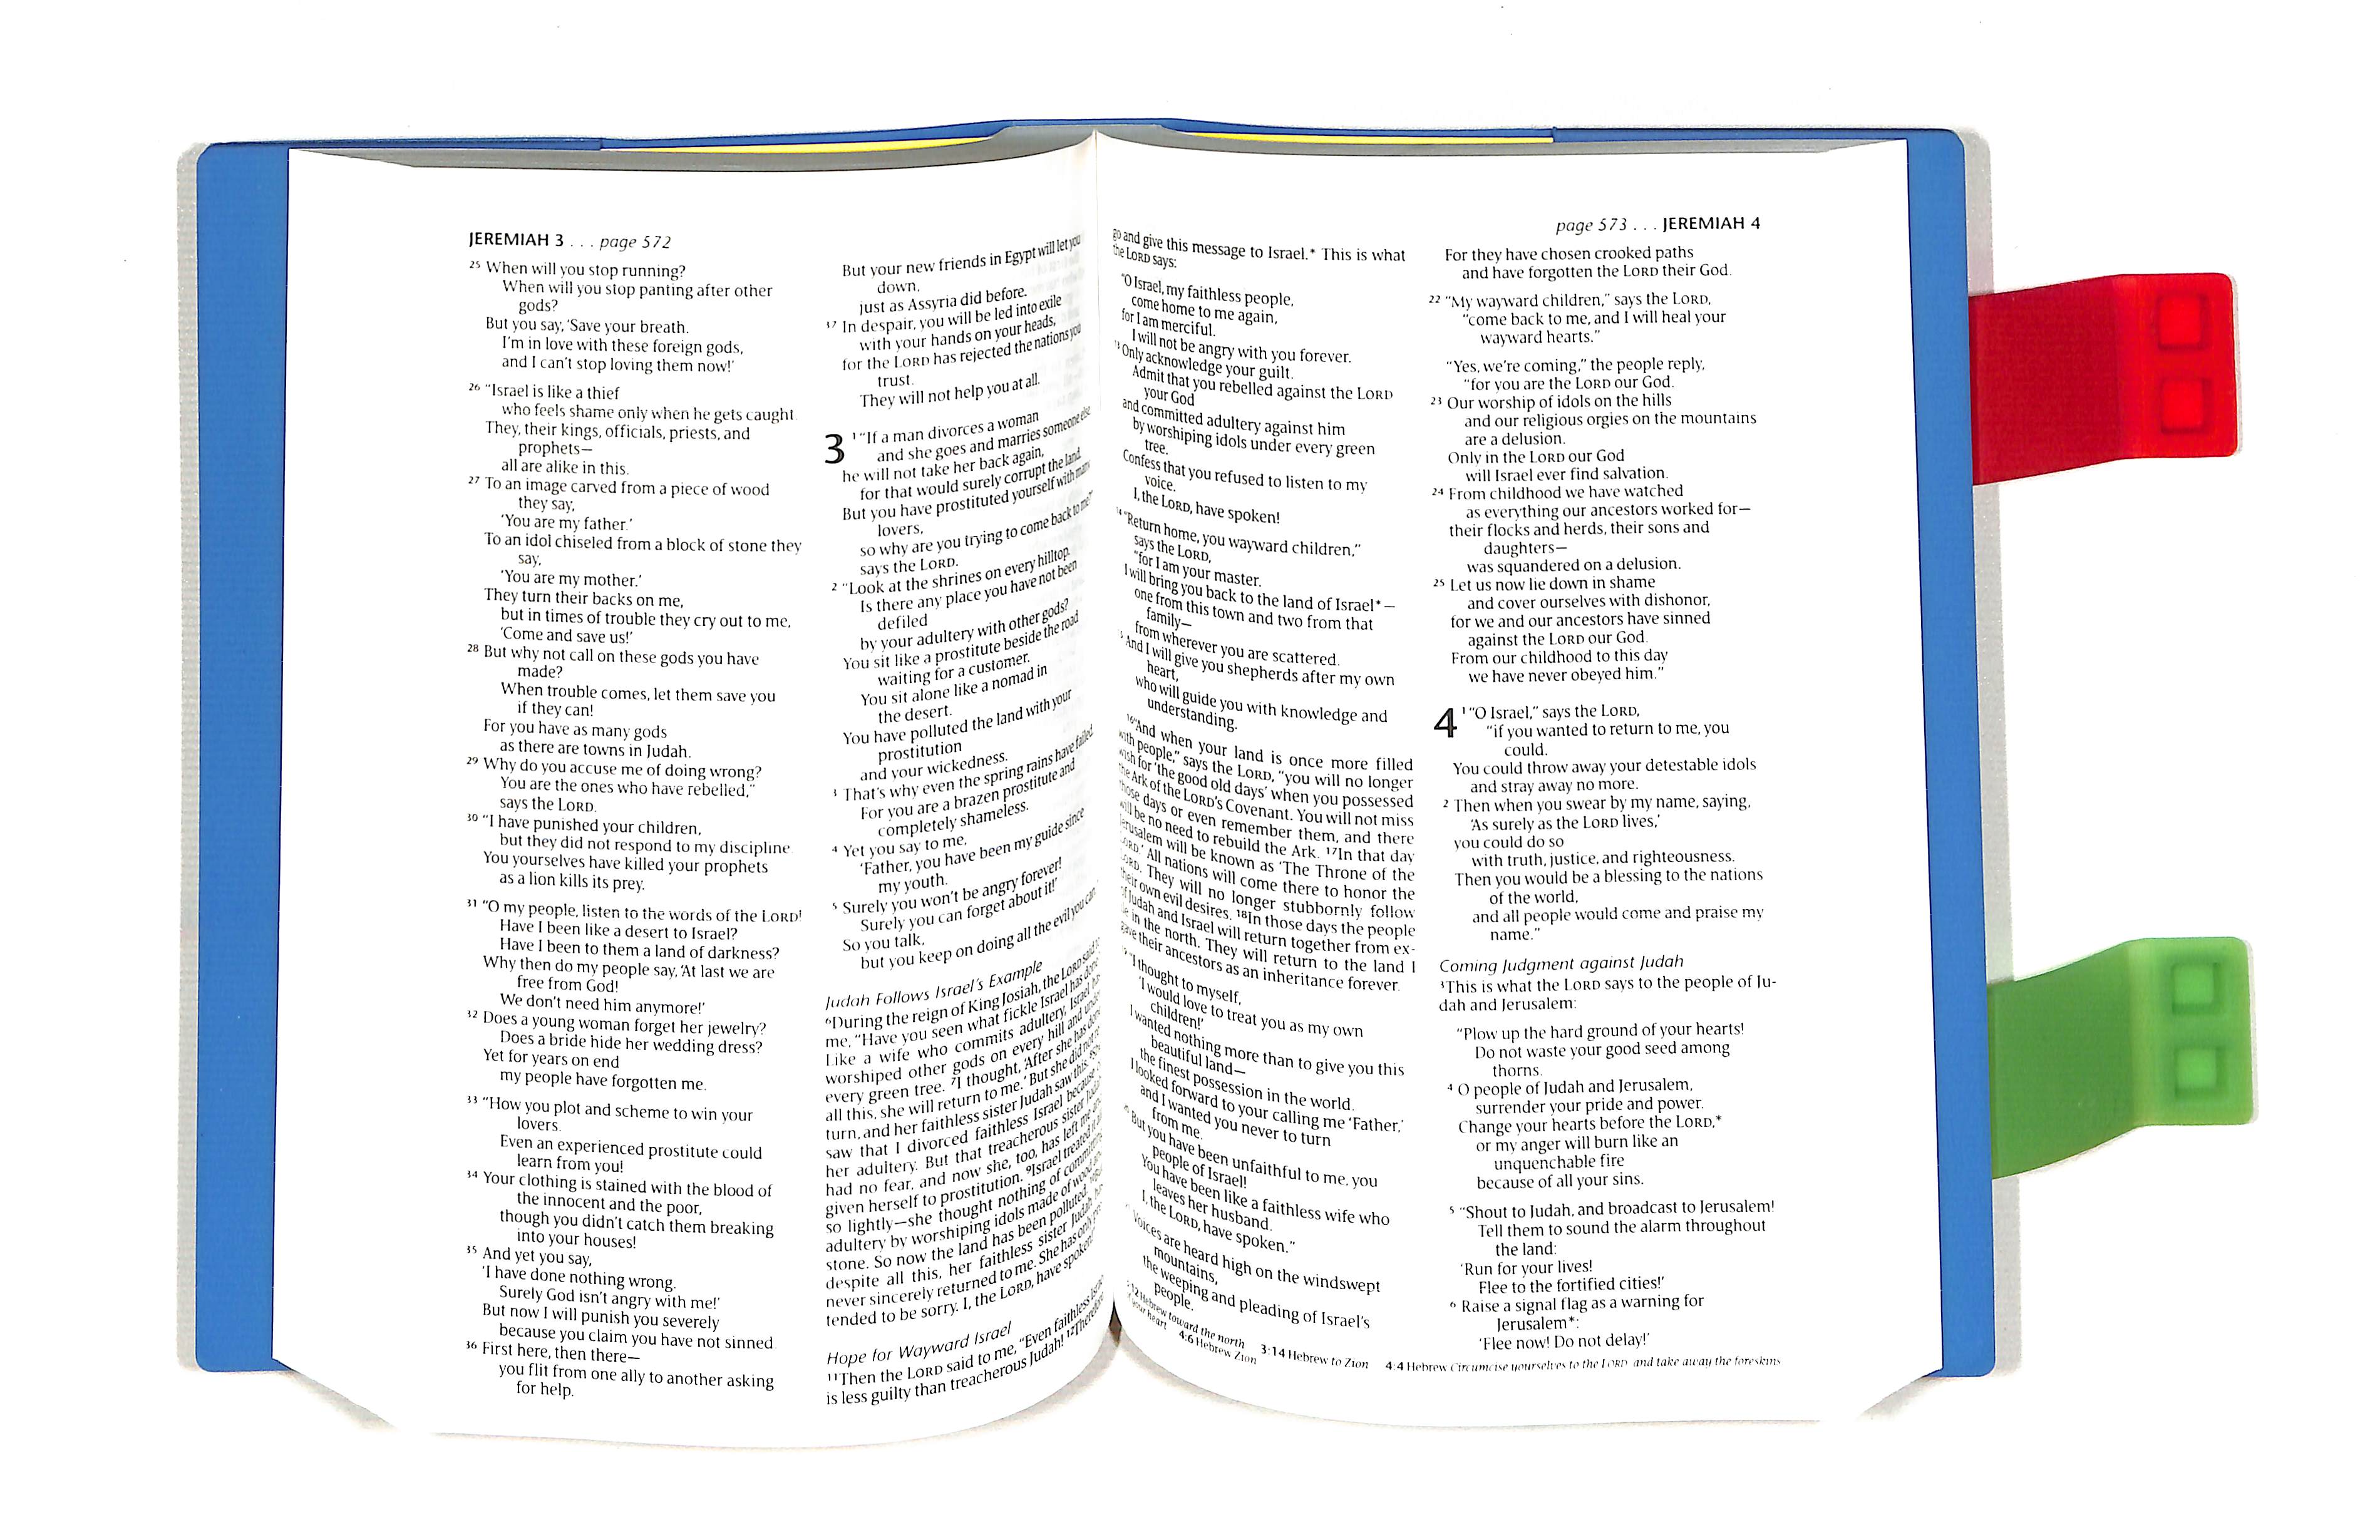 Image of NLT Glipit Bible: Blue, Customisable Silicone Cover other